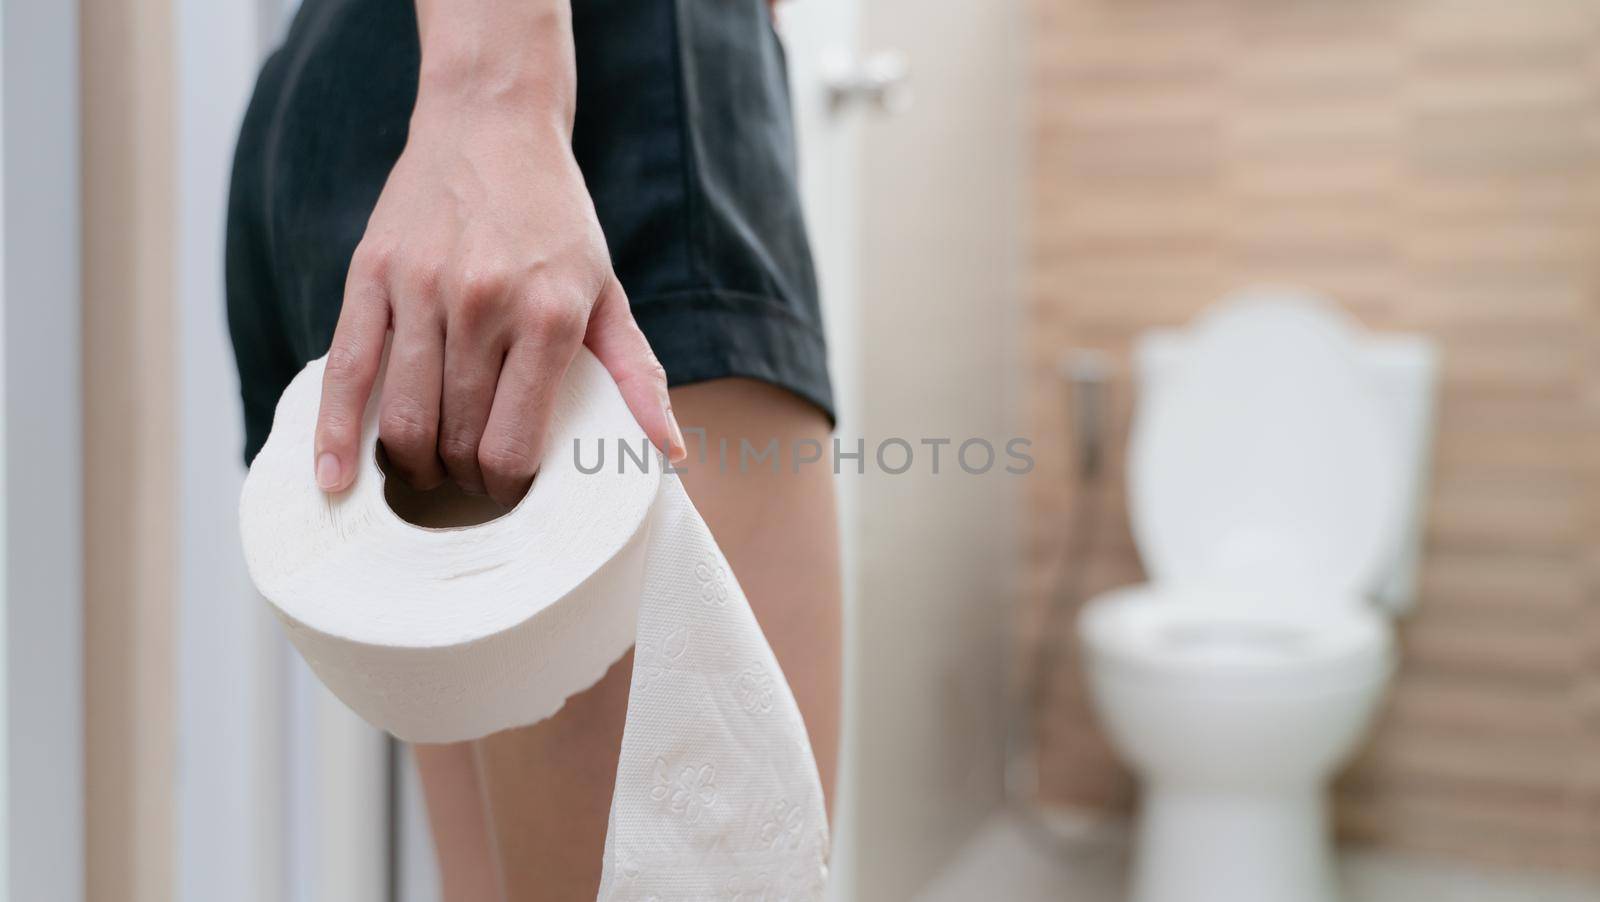 woman with toilet paper, stomachache diarrhea symptom, menstrual period cramp or food poisoning. Health care concept.